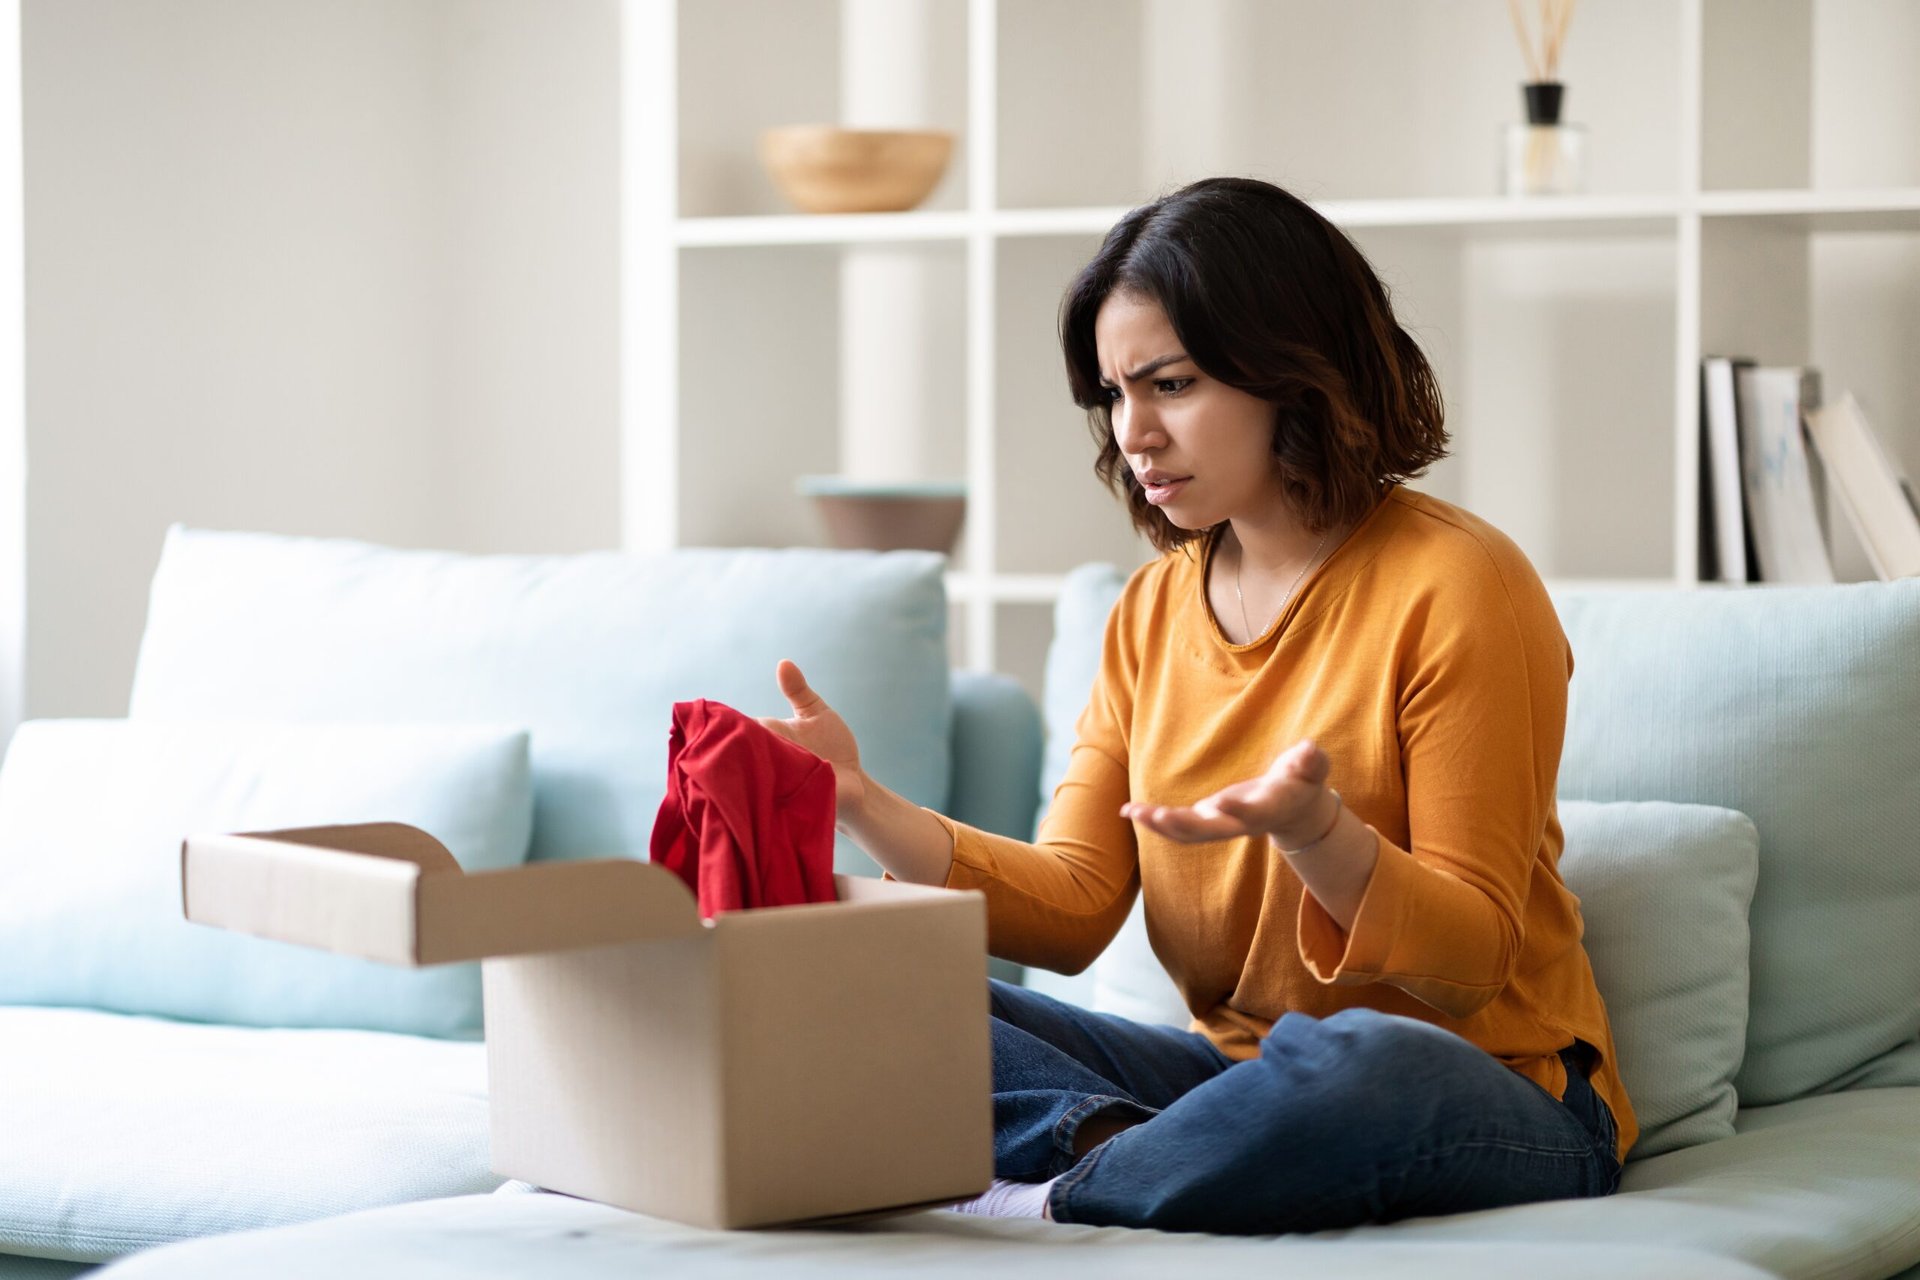 Angry, frustrated woman upset or confused by a package delivery with the wrong contents or a disappointing online order from internet shopping gone wrong